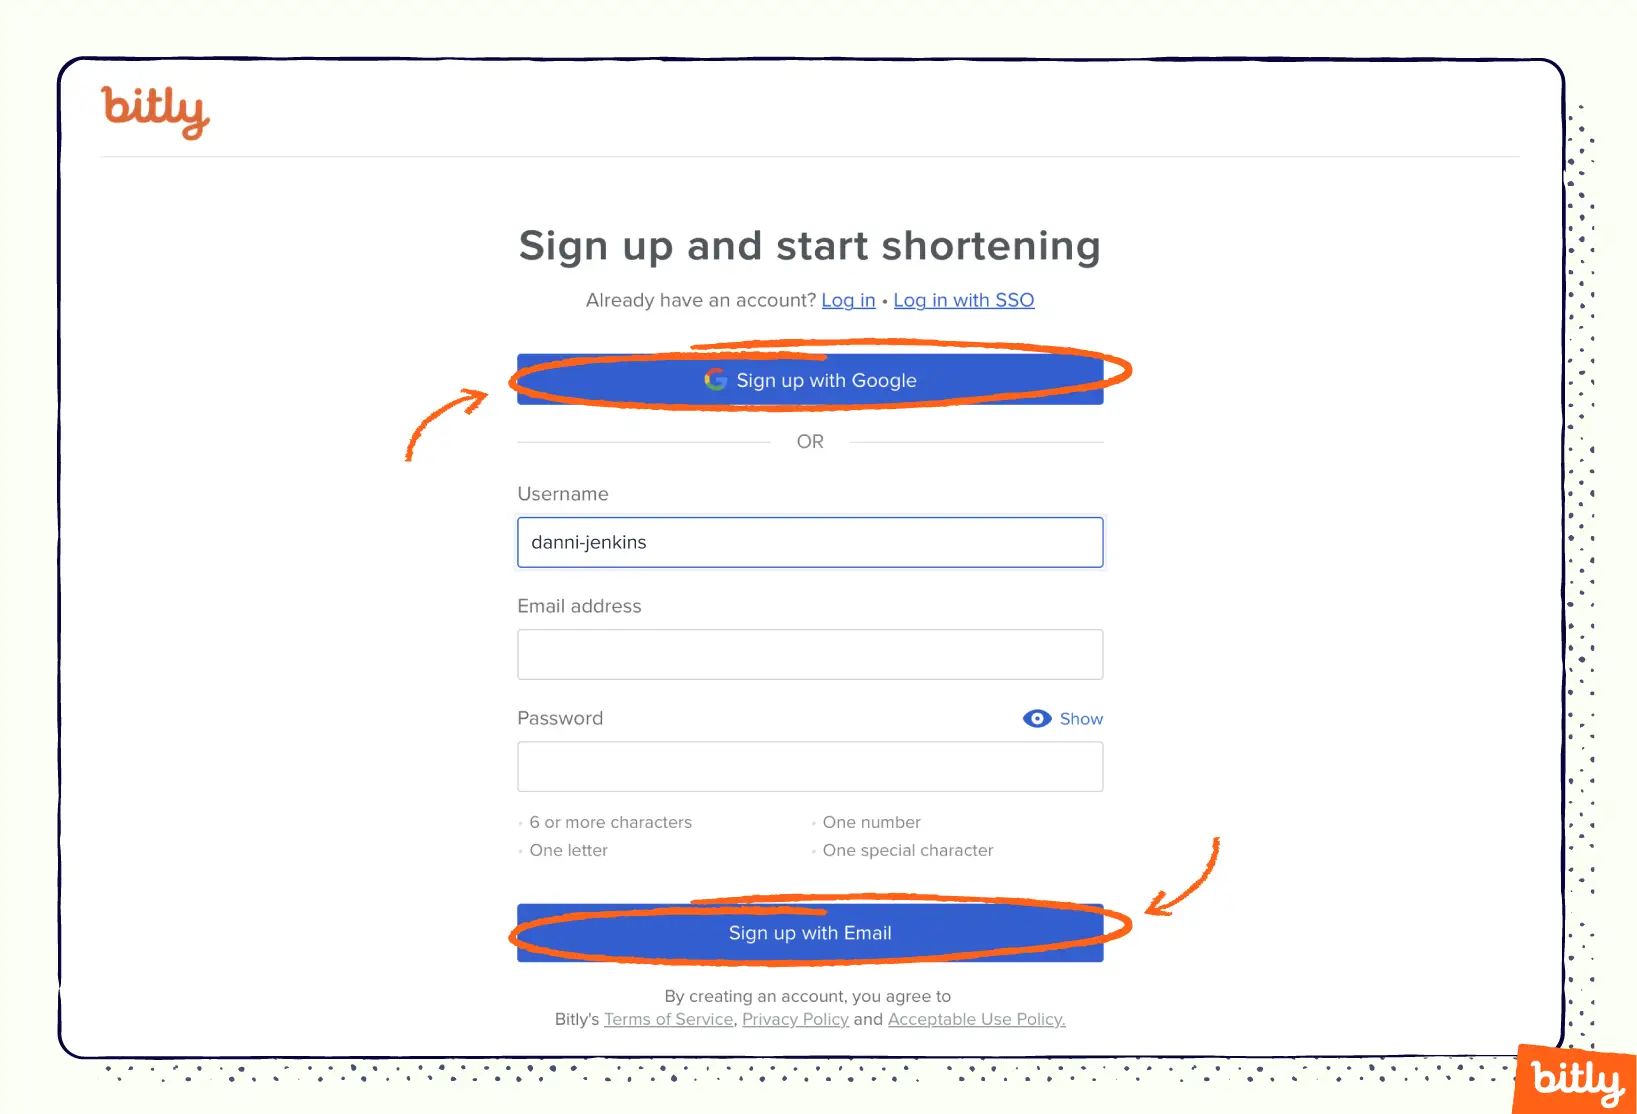 Orange arrows pointing to the two sign up options for Bitly, sign up with Google and sign up with email.